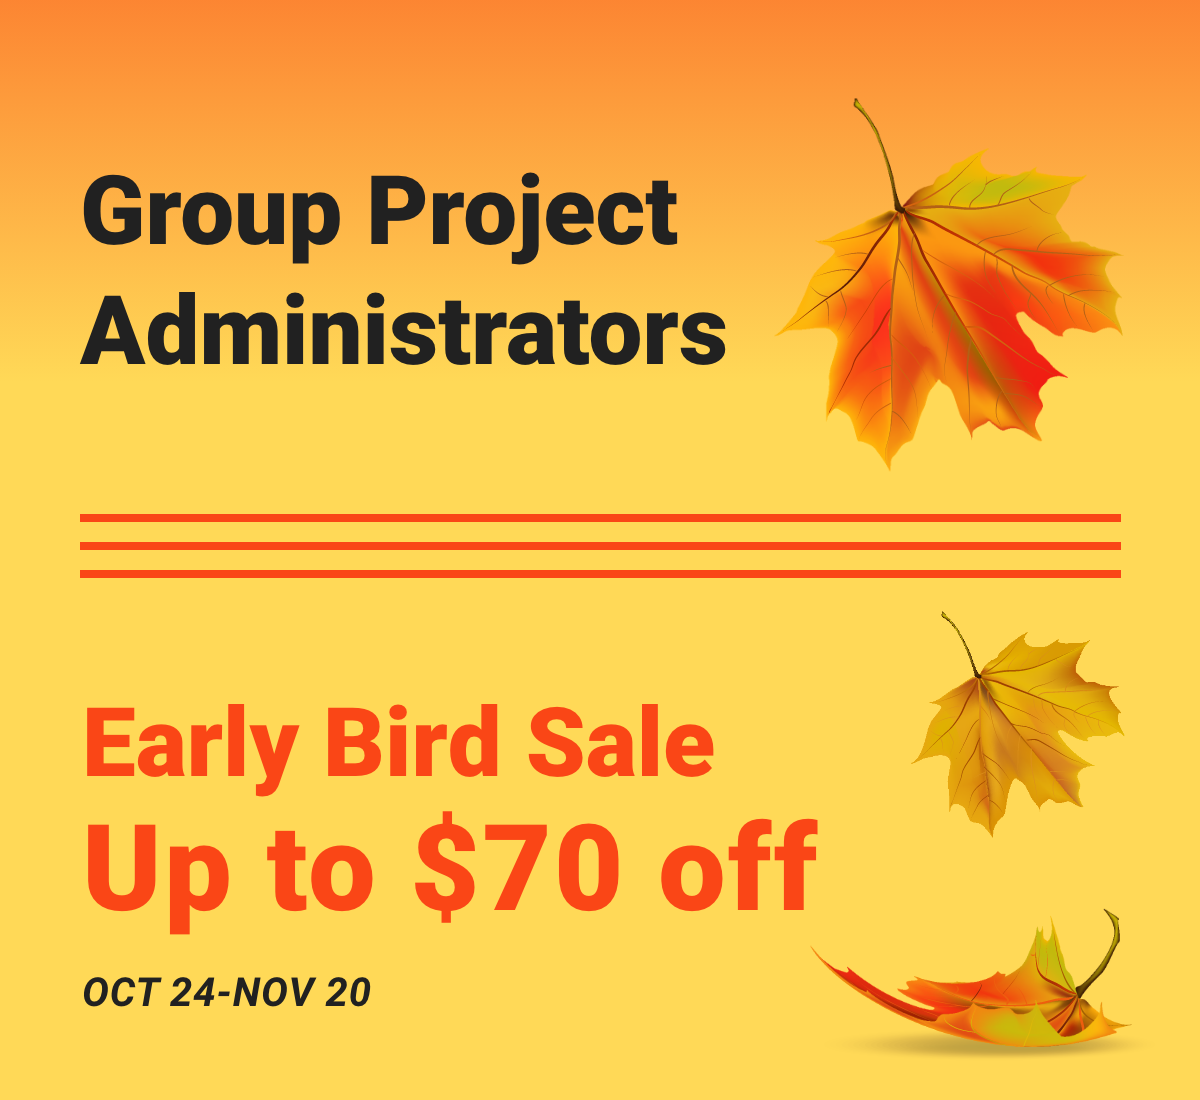 Early Bird Sale - Up to $70 Off - October 24-November 20